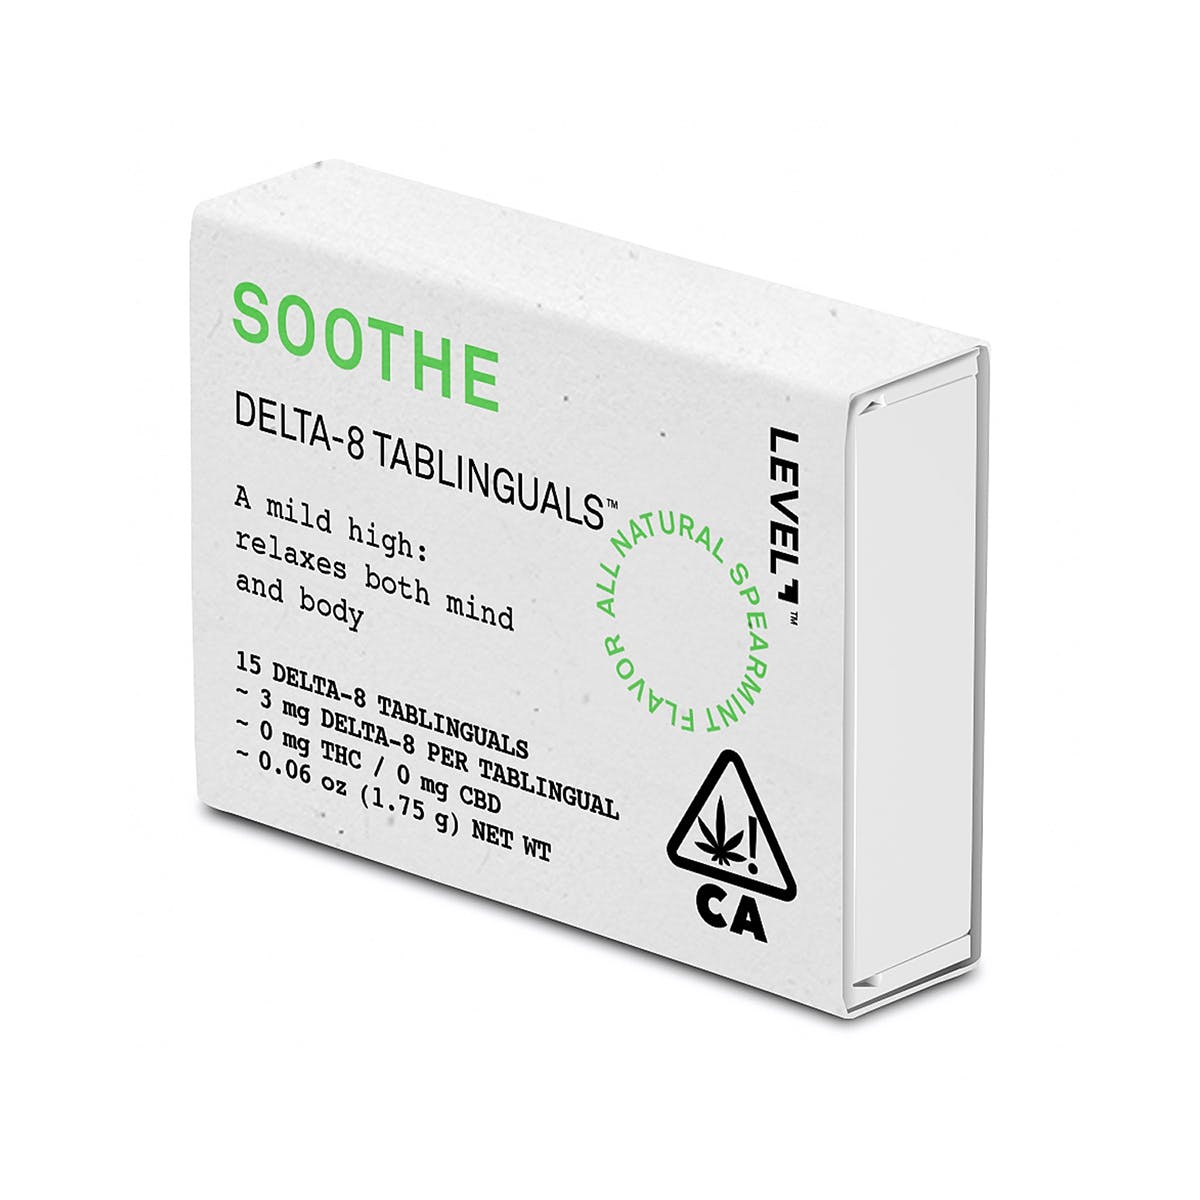 SOOTHE Tablingual 45mg Delta-8 THC